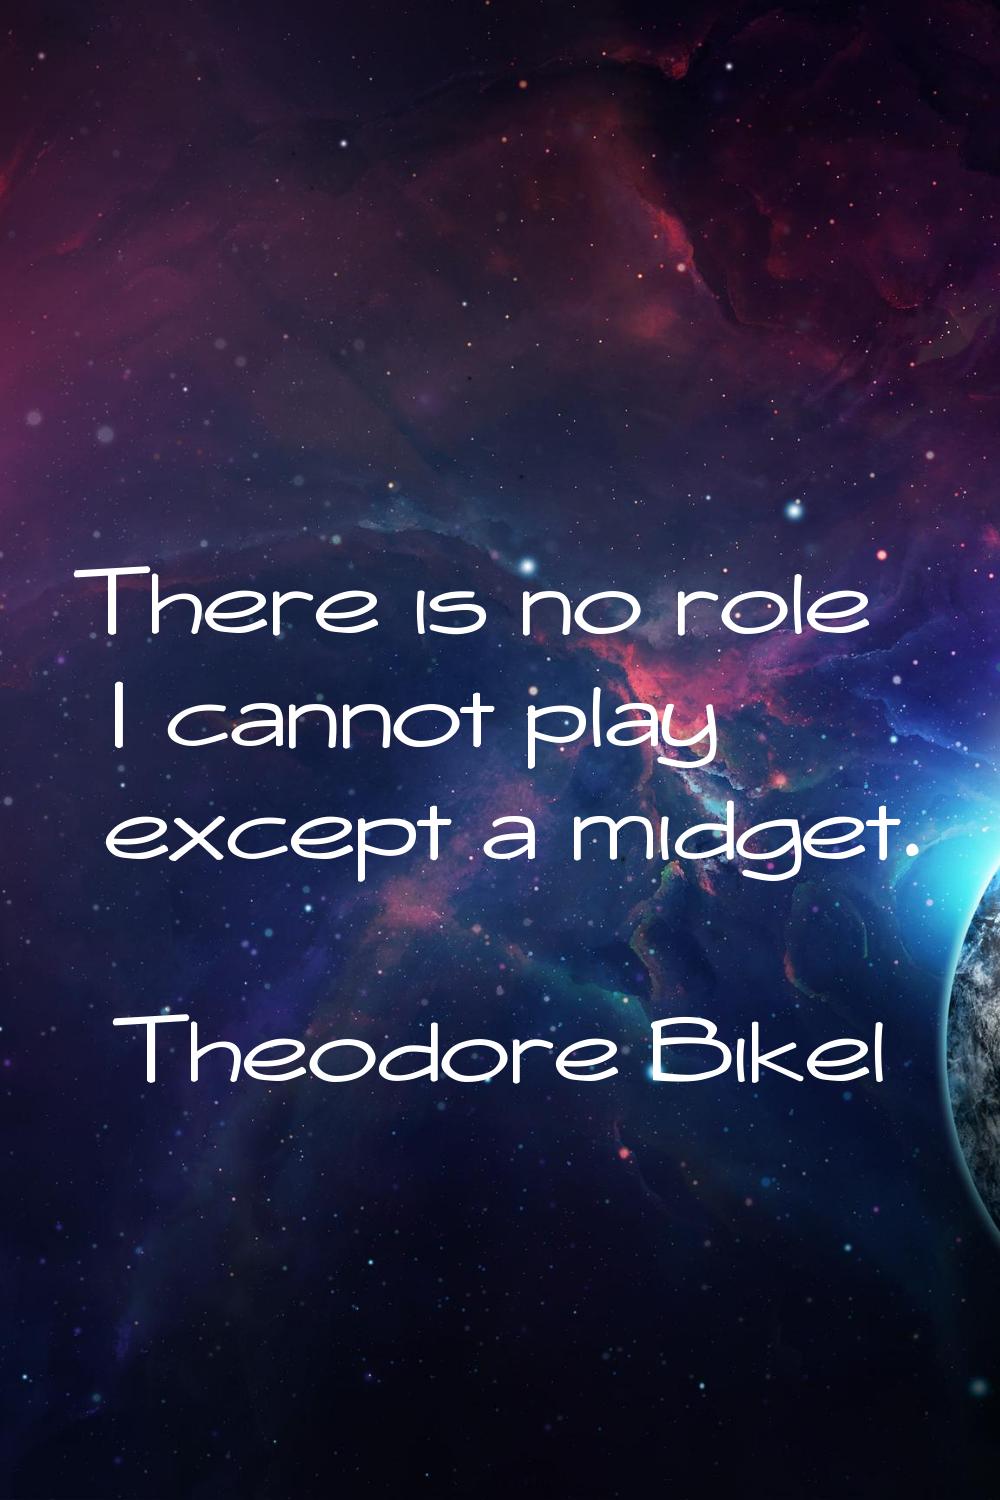 There is no role I cannot play except a midget.